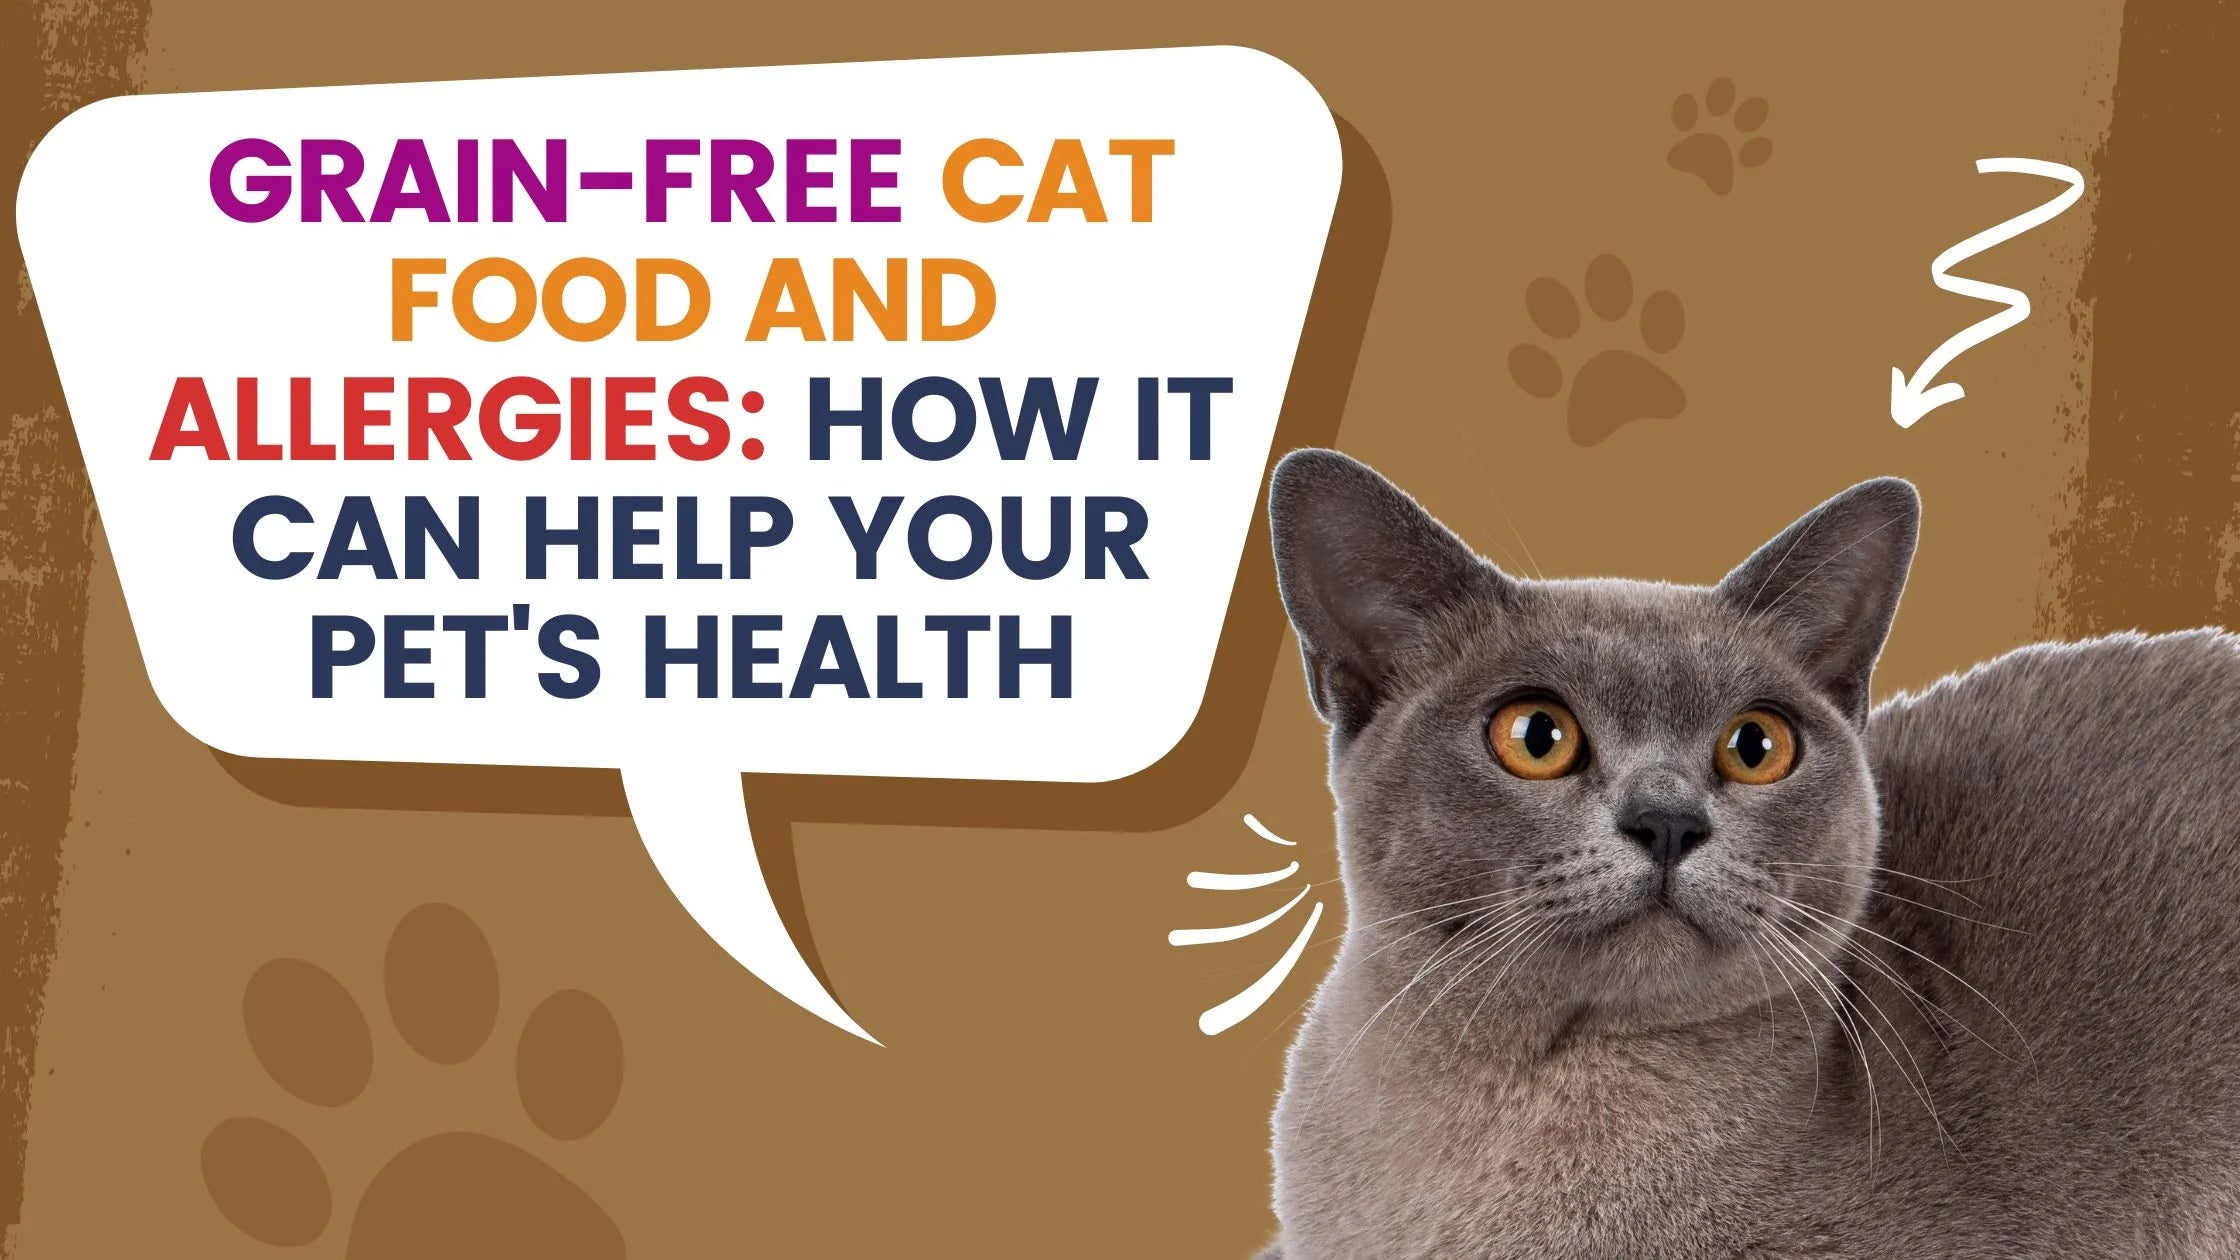 Grain-Free Cat Food and Allergies: How it Can Help Your Pet's Health